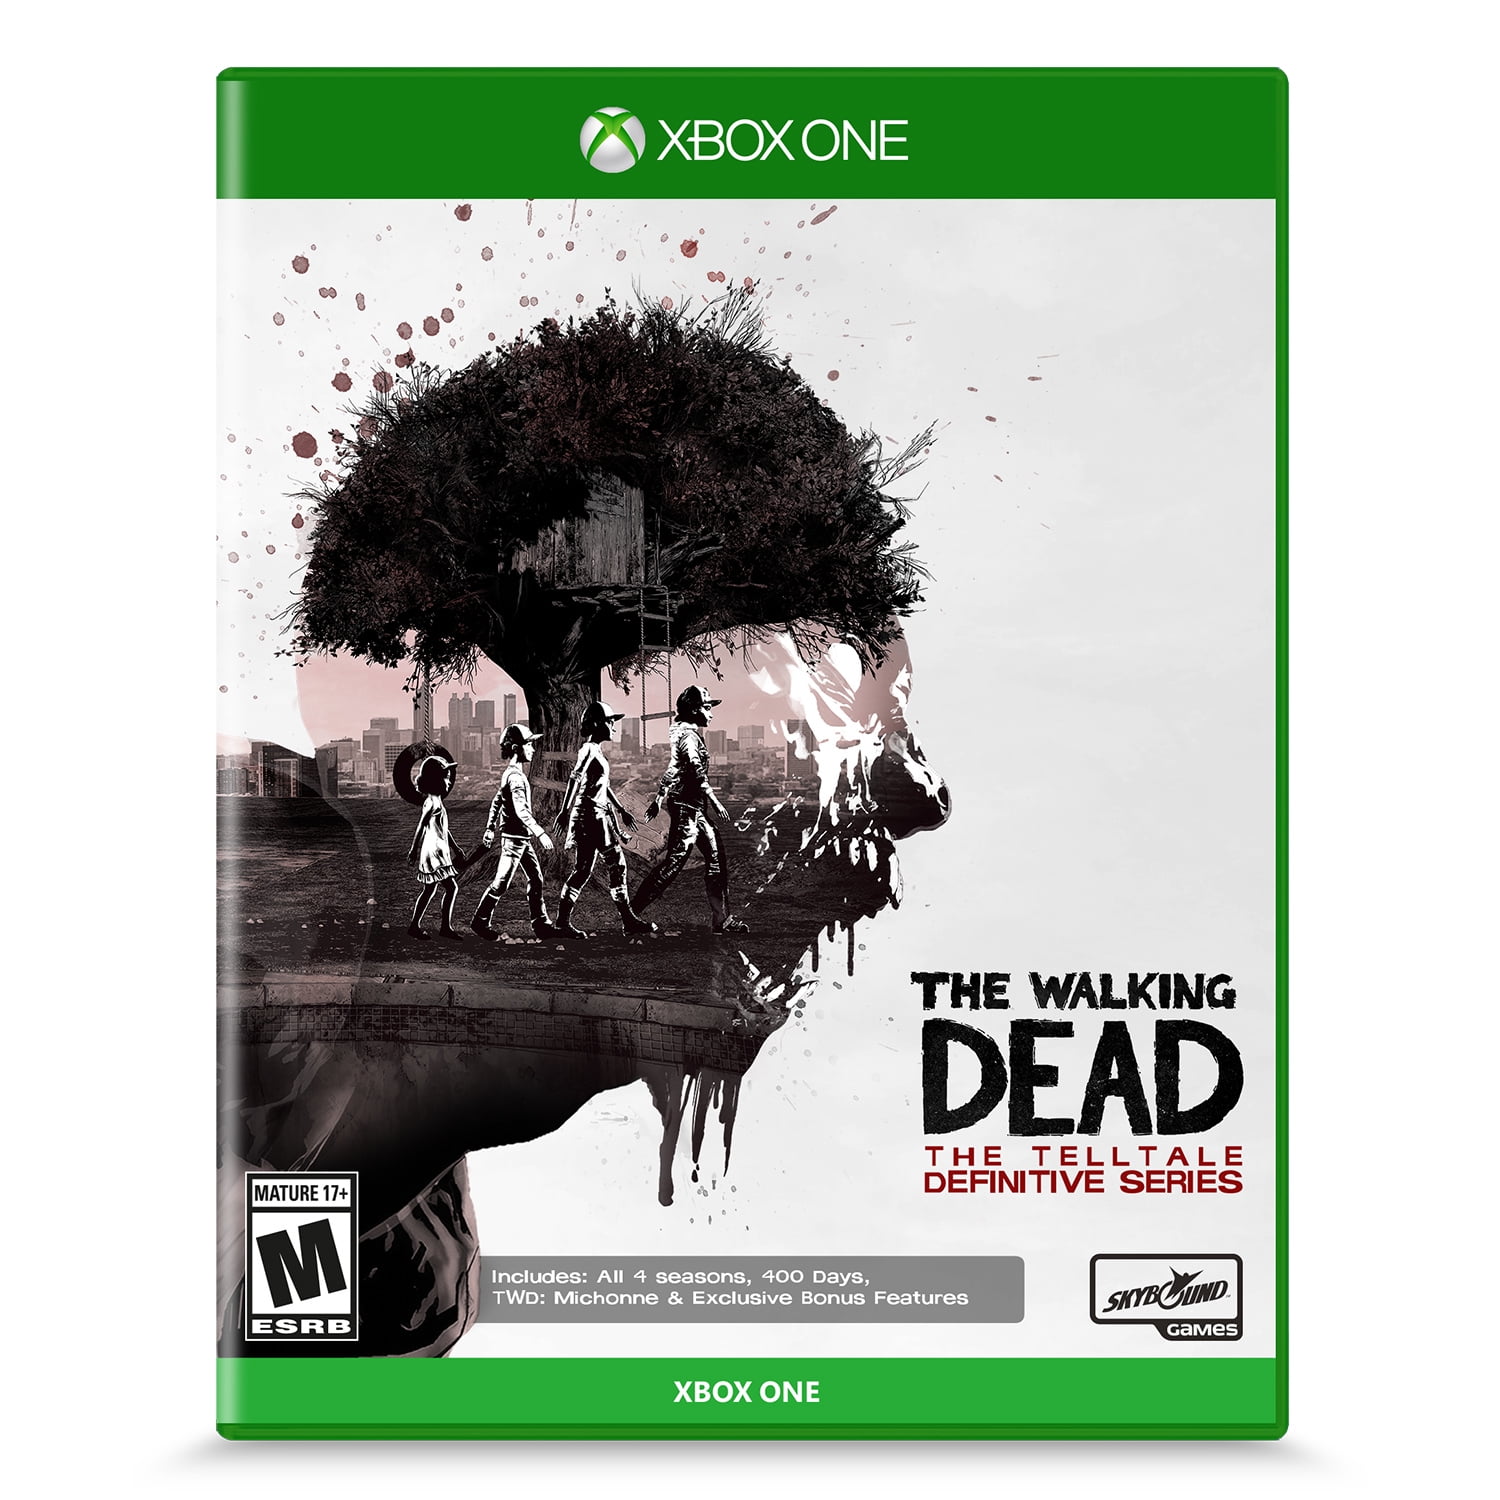 The Walking Dead The Telltale Definitive Series Skybound Games